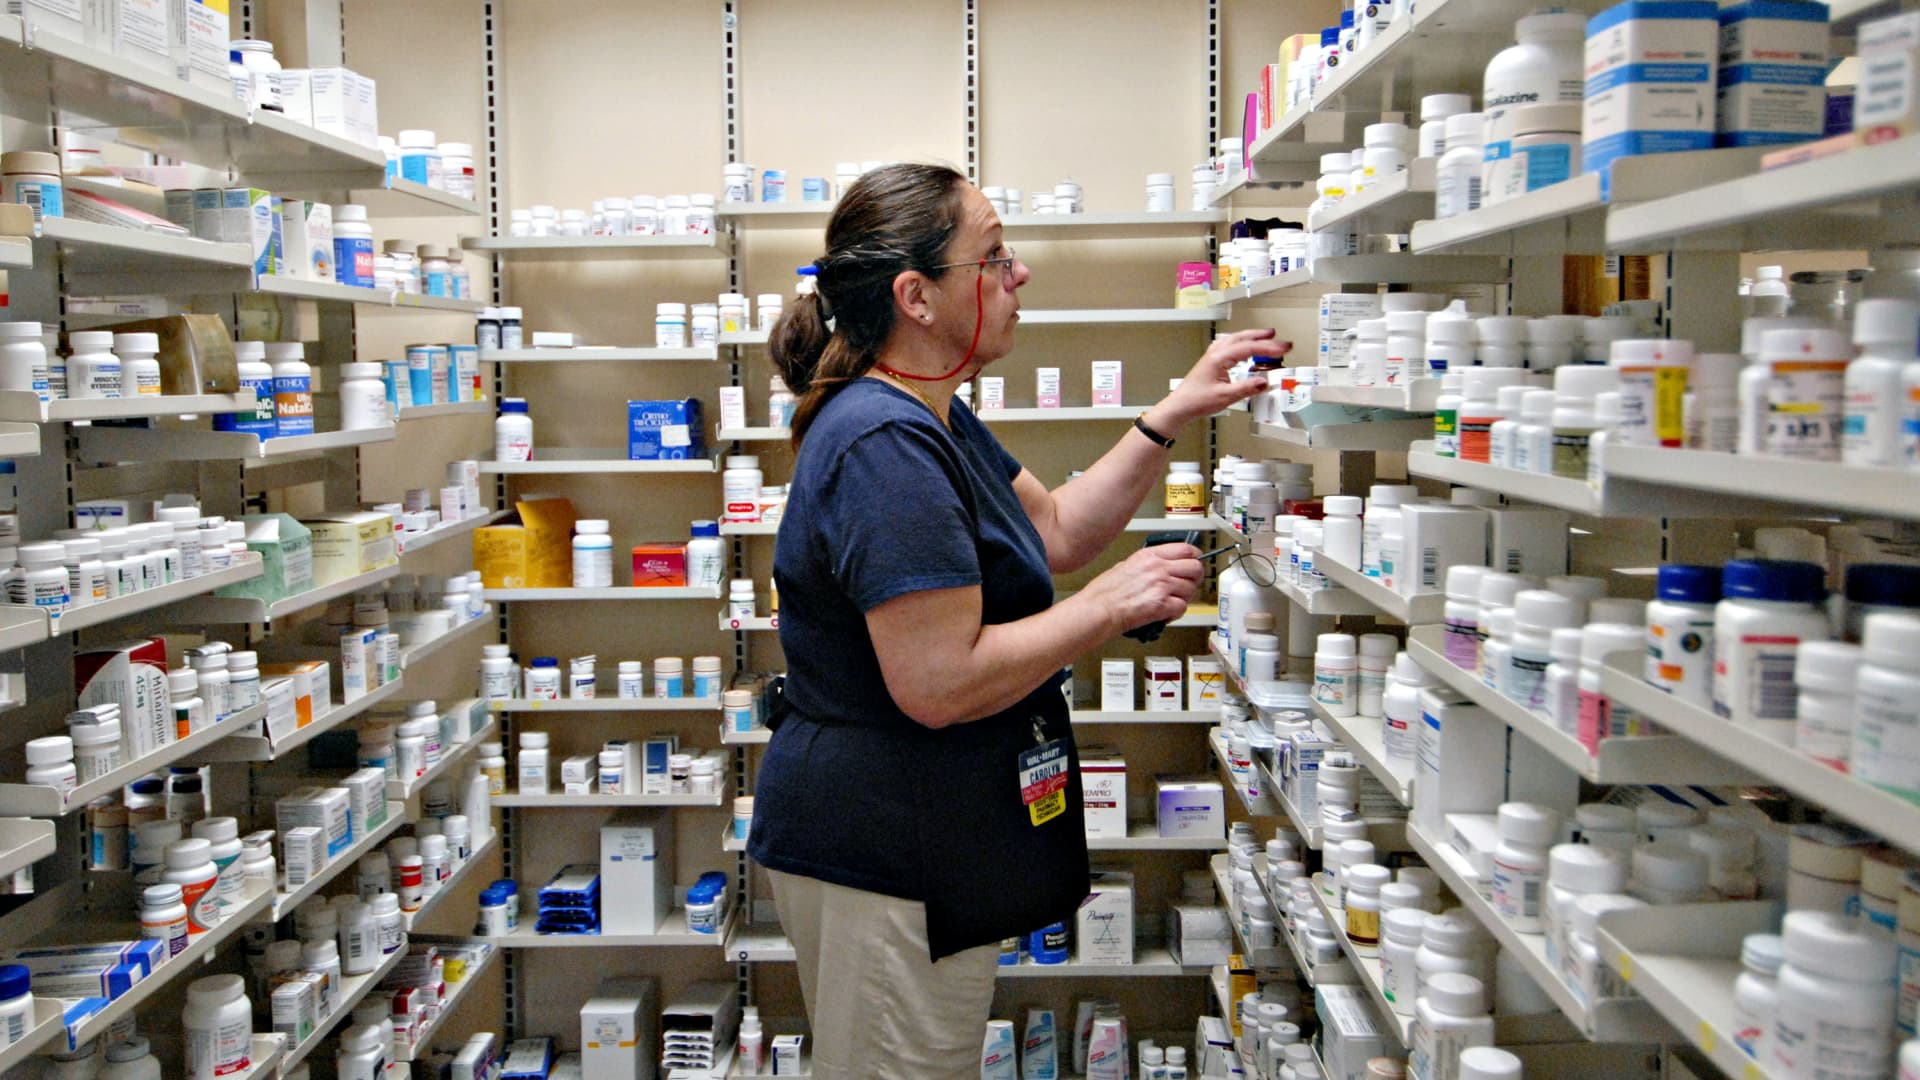 Walmart raises wages of pharmacy workers in tight labor market